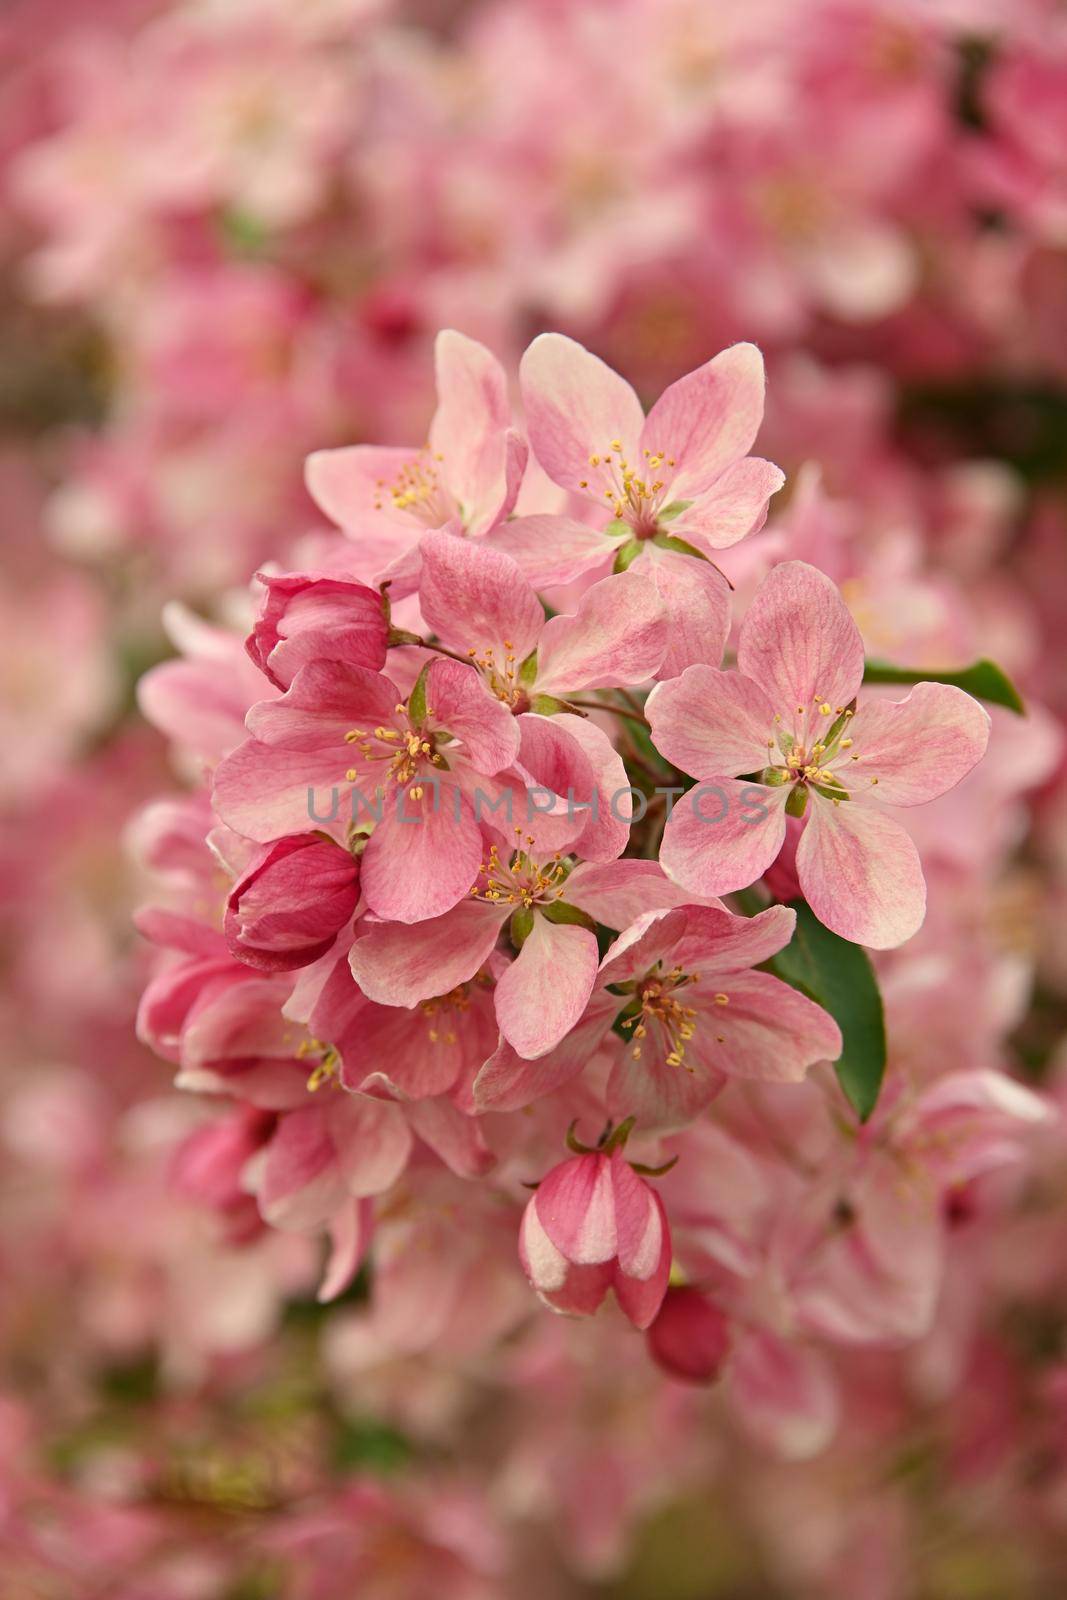 Close up pink Asian wild crabapple tree blossom with leaves over green background with copy space, low angle view